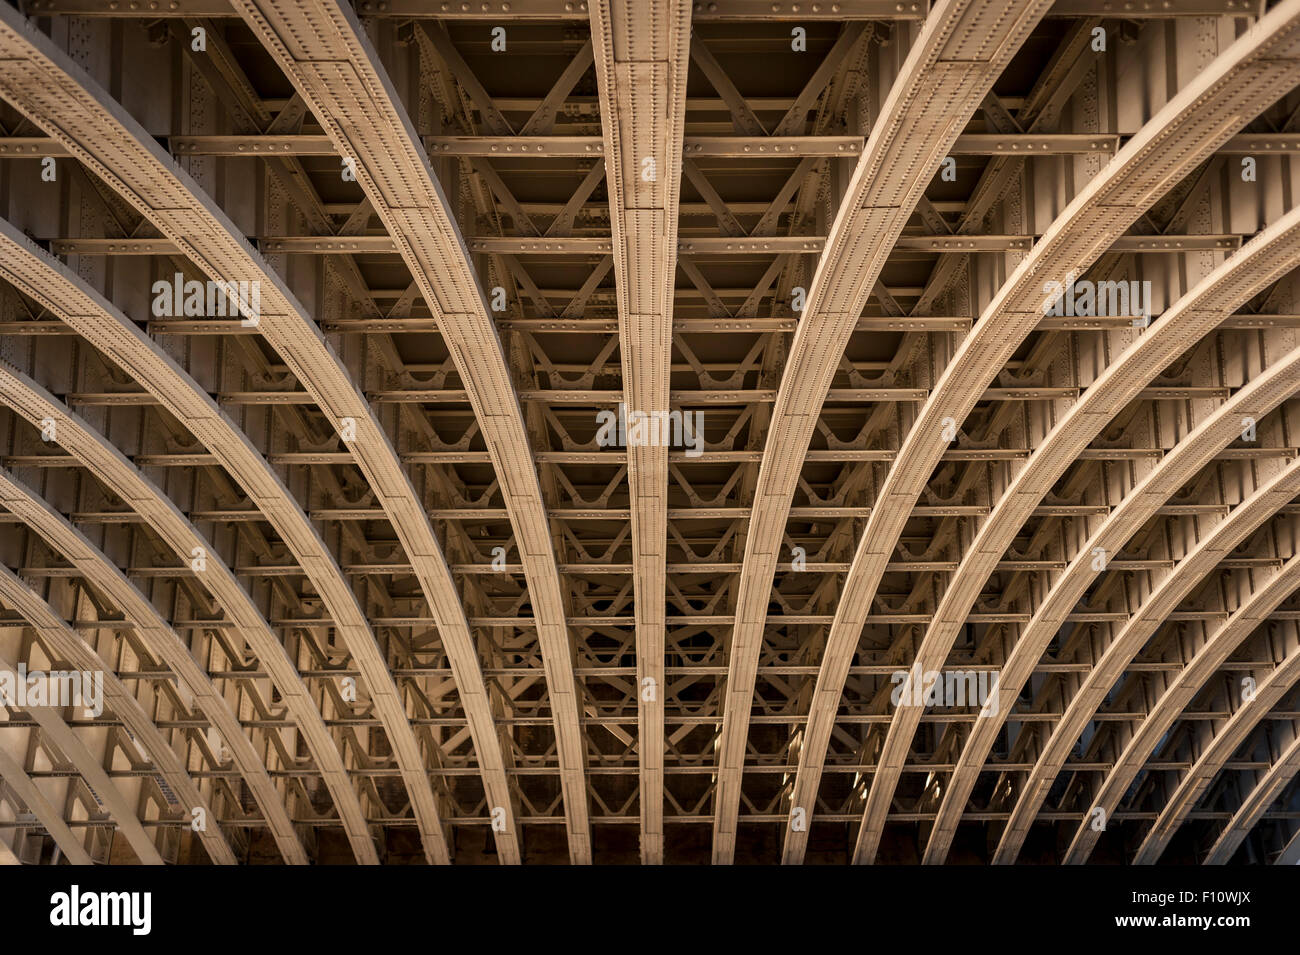 London, UK. 22 August 2015.  A view of the underneath of Blackfriars Bridge. Stock Photo